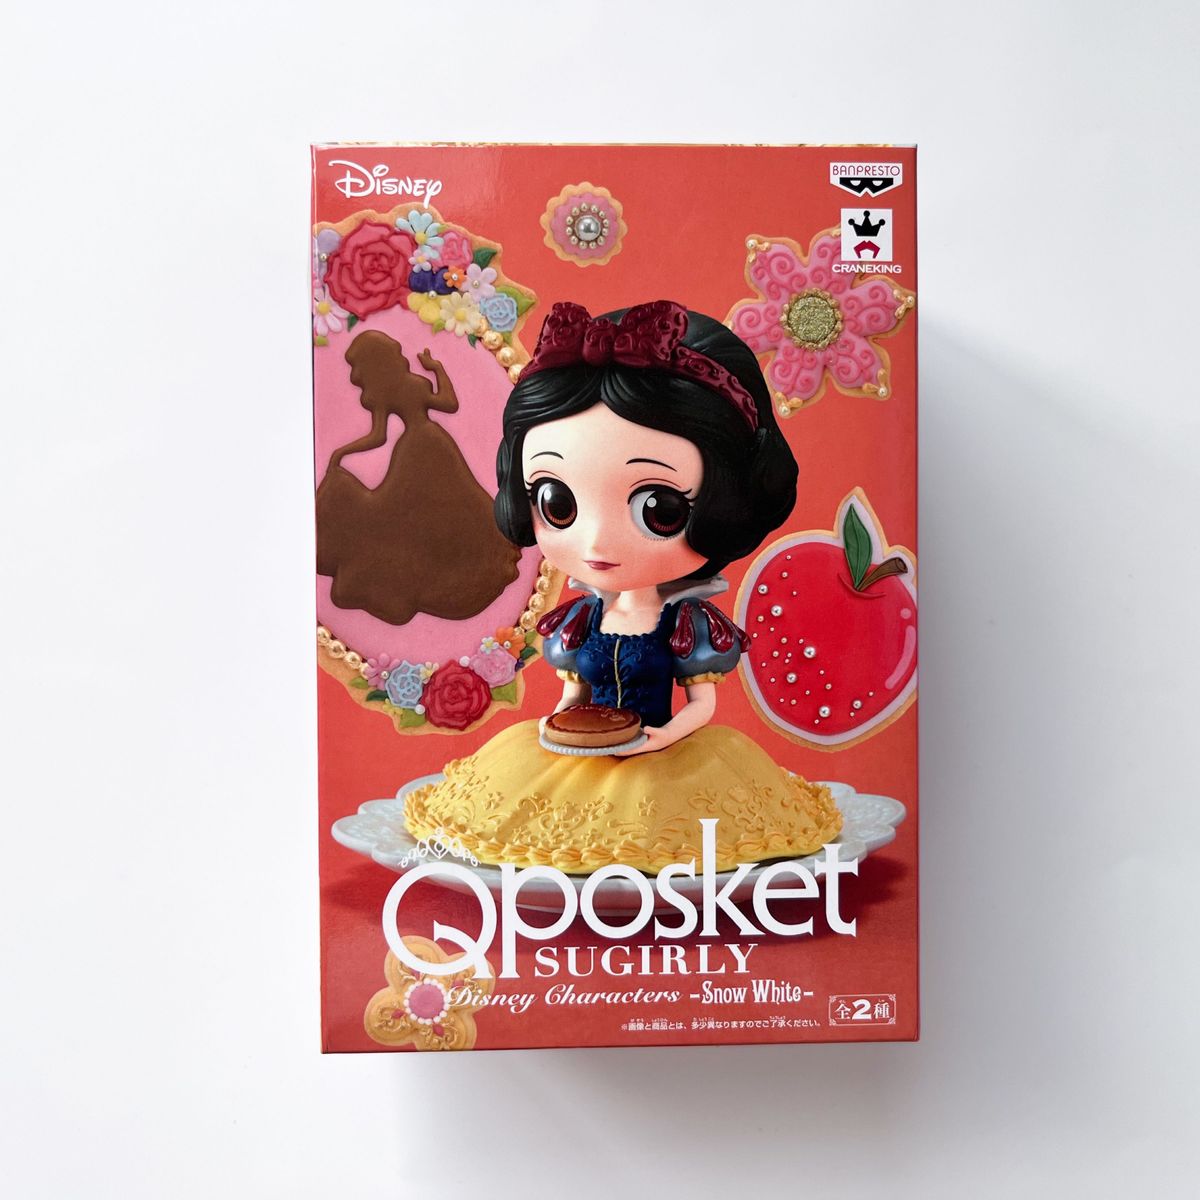 Qposket sugirly Disney Characters Snow White 白雪姫 ディズニー バンプレスト